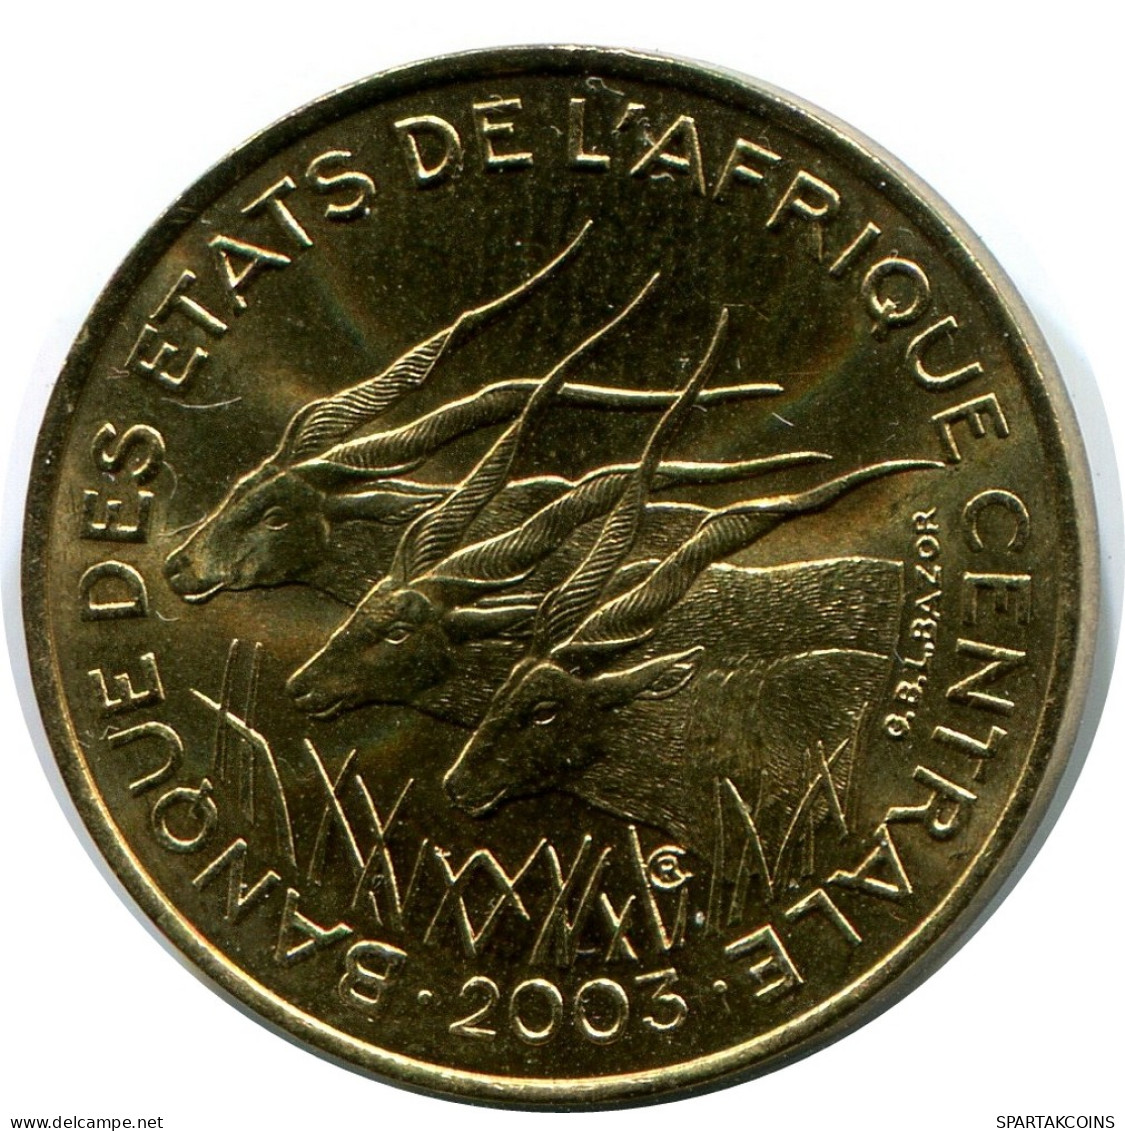 5 FRANCS CFA 2003 CENTRAL AFRICAN STATES (BEAC) Coin #AP859.U - Centraal-Afrikaanse Republiek